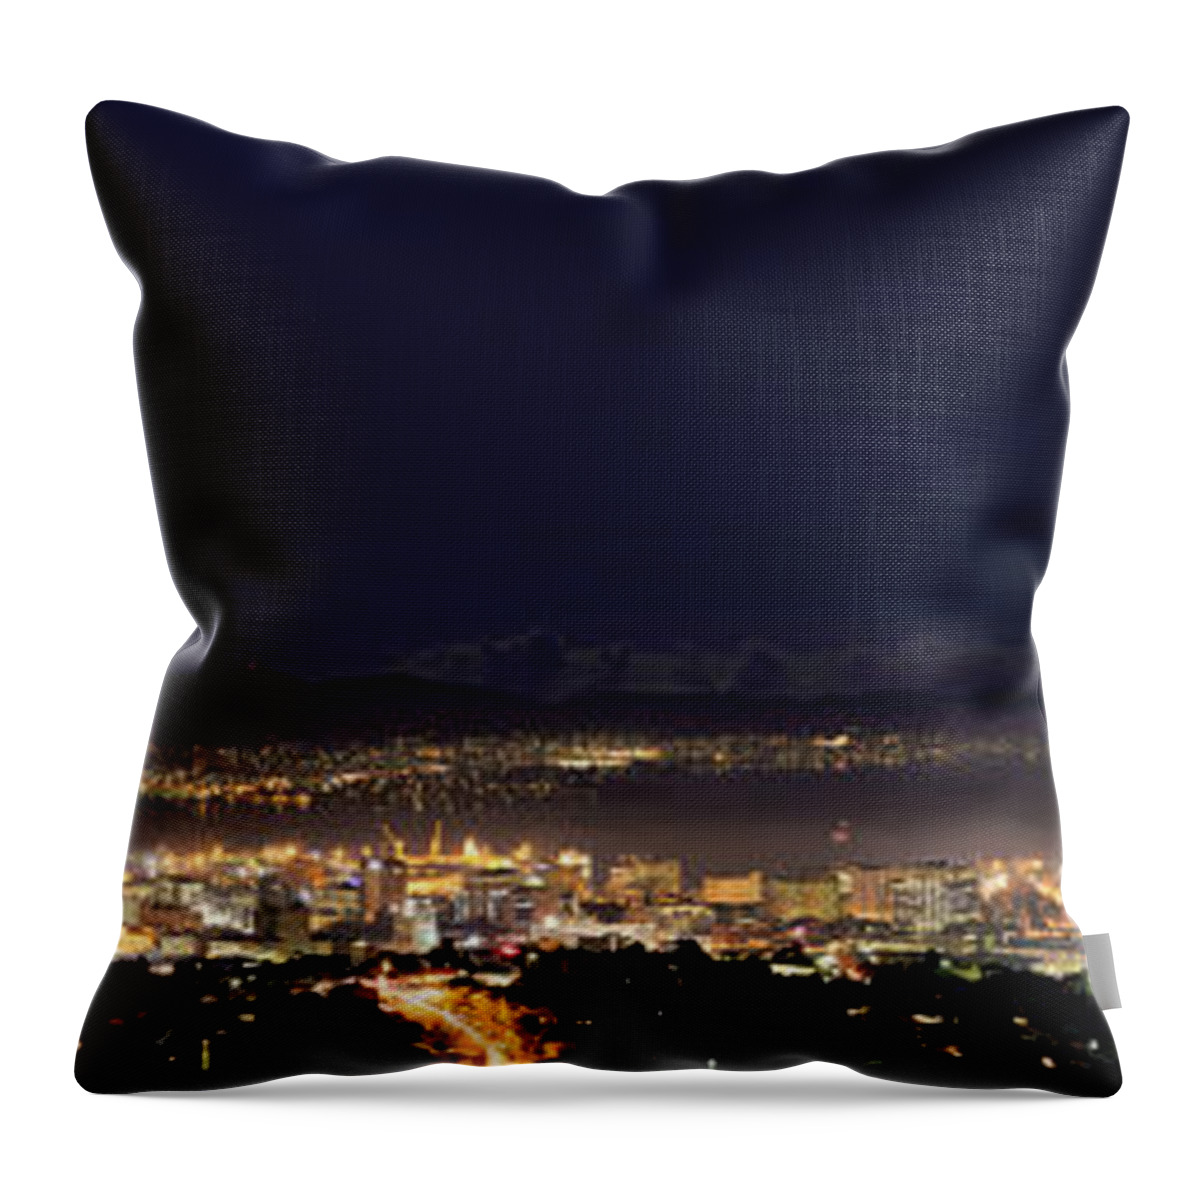 Spectra Throw Pillow featuring the photograph Spectra with Moonlit Sky by Anthony Davey